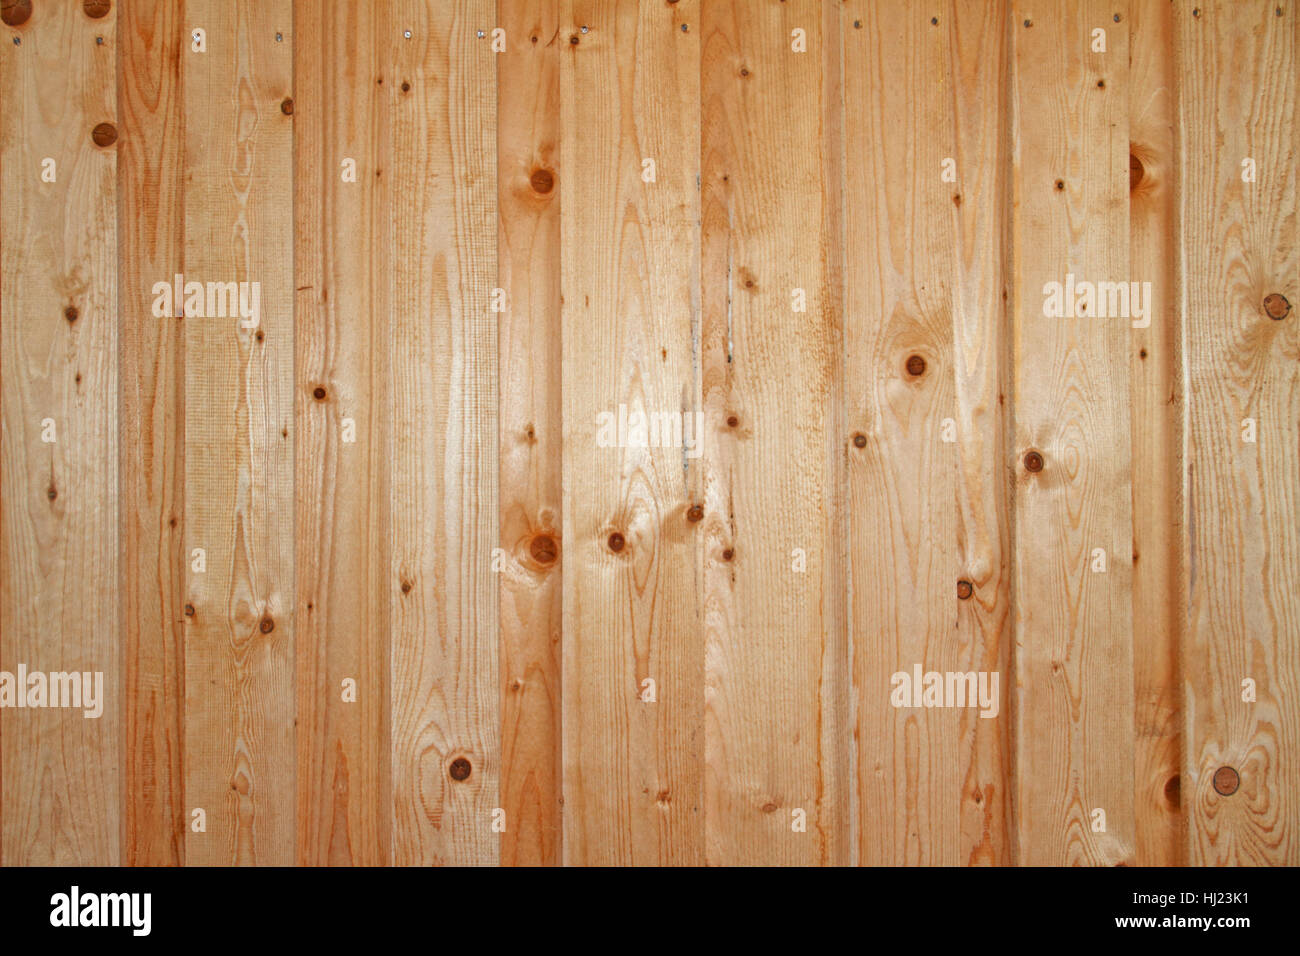 profile wooden wall Stock Photo